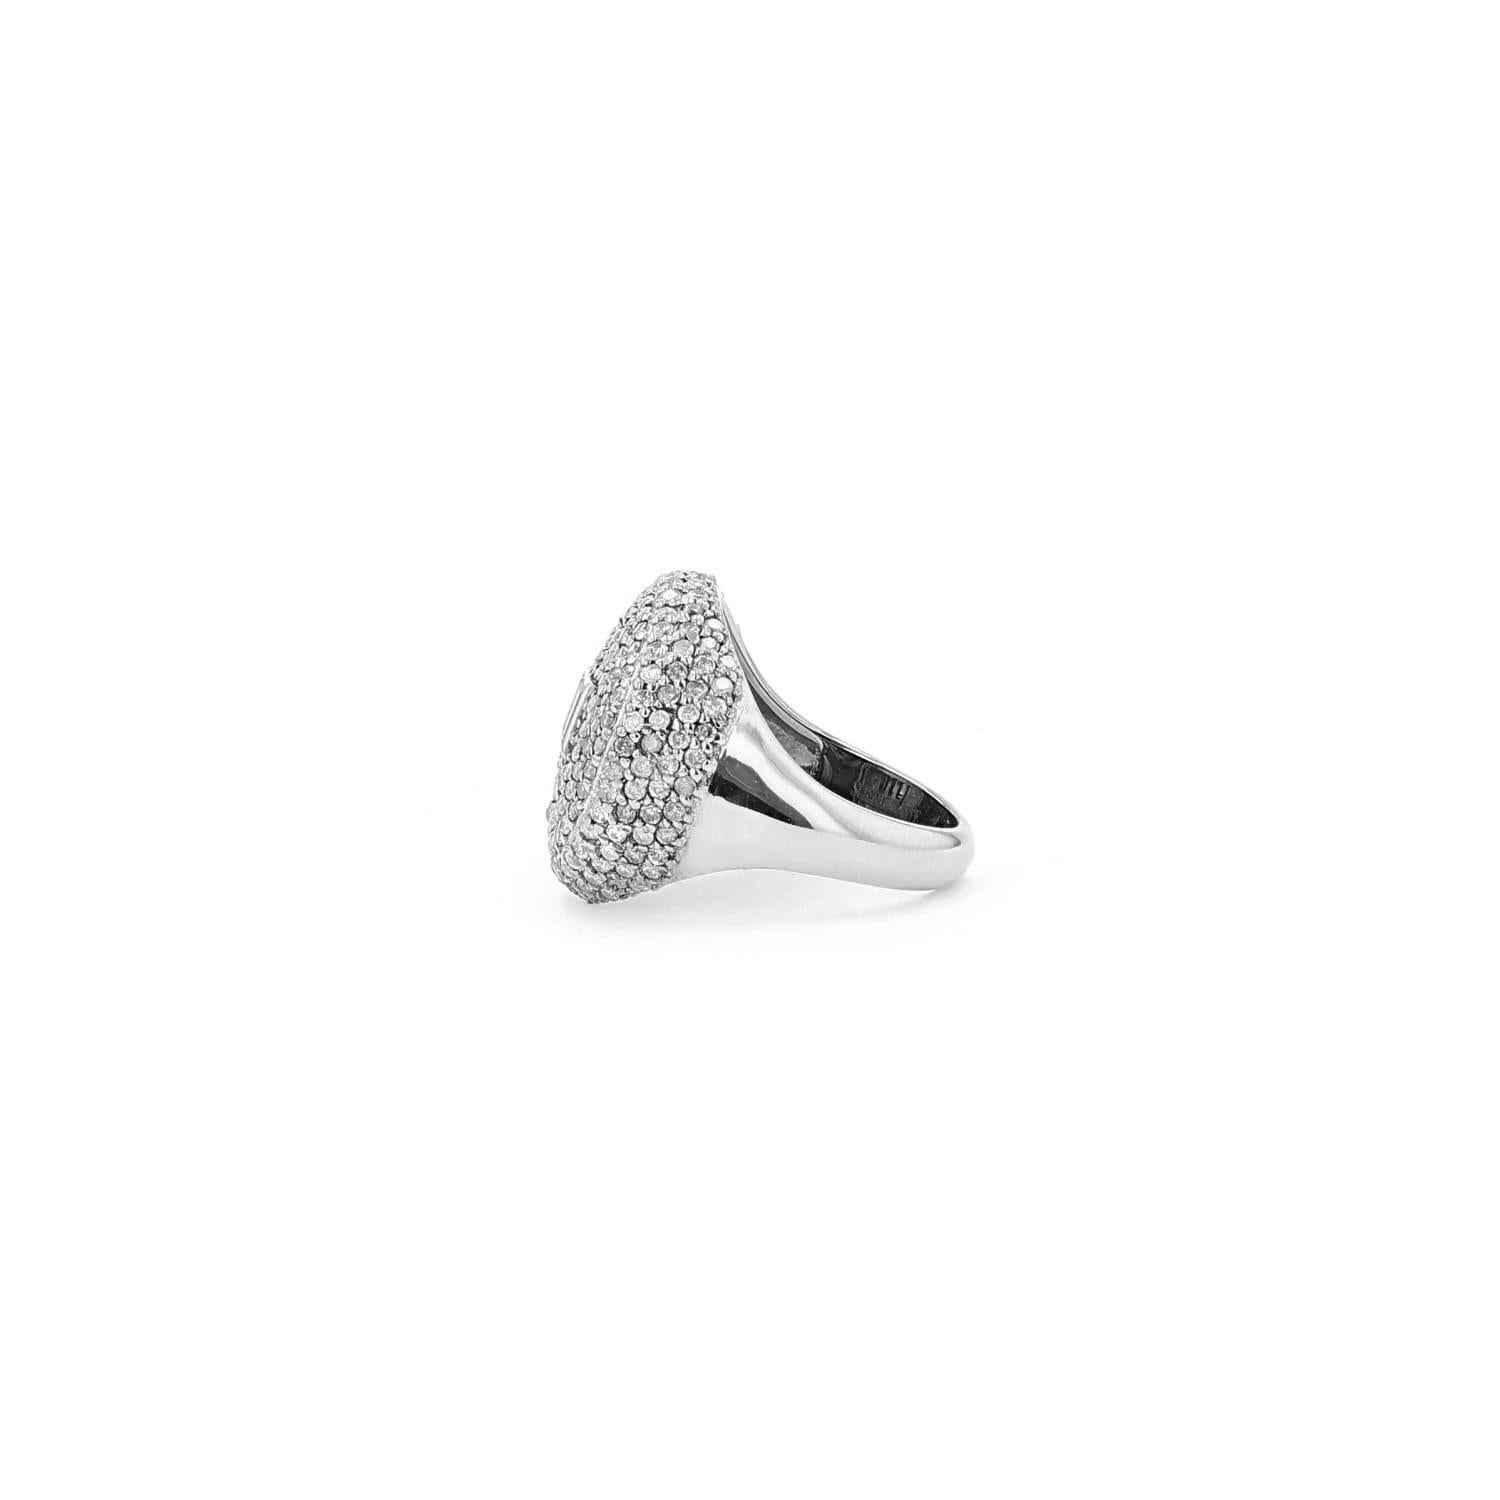 -Sterling silver
-Diamonds, approximately 2.67 carats
-20mm diameter
-Size 7, sizable upon request
-Style number R0064-7